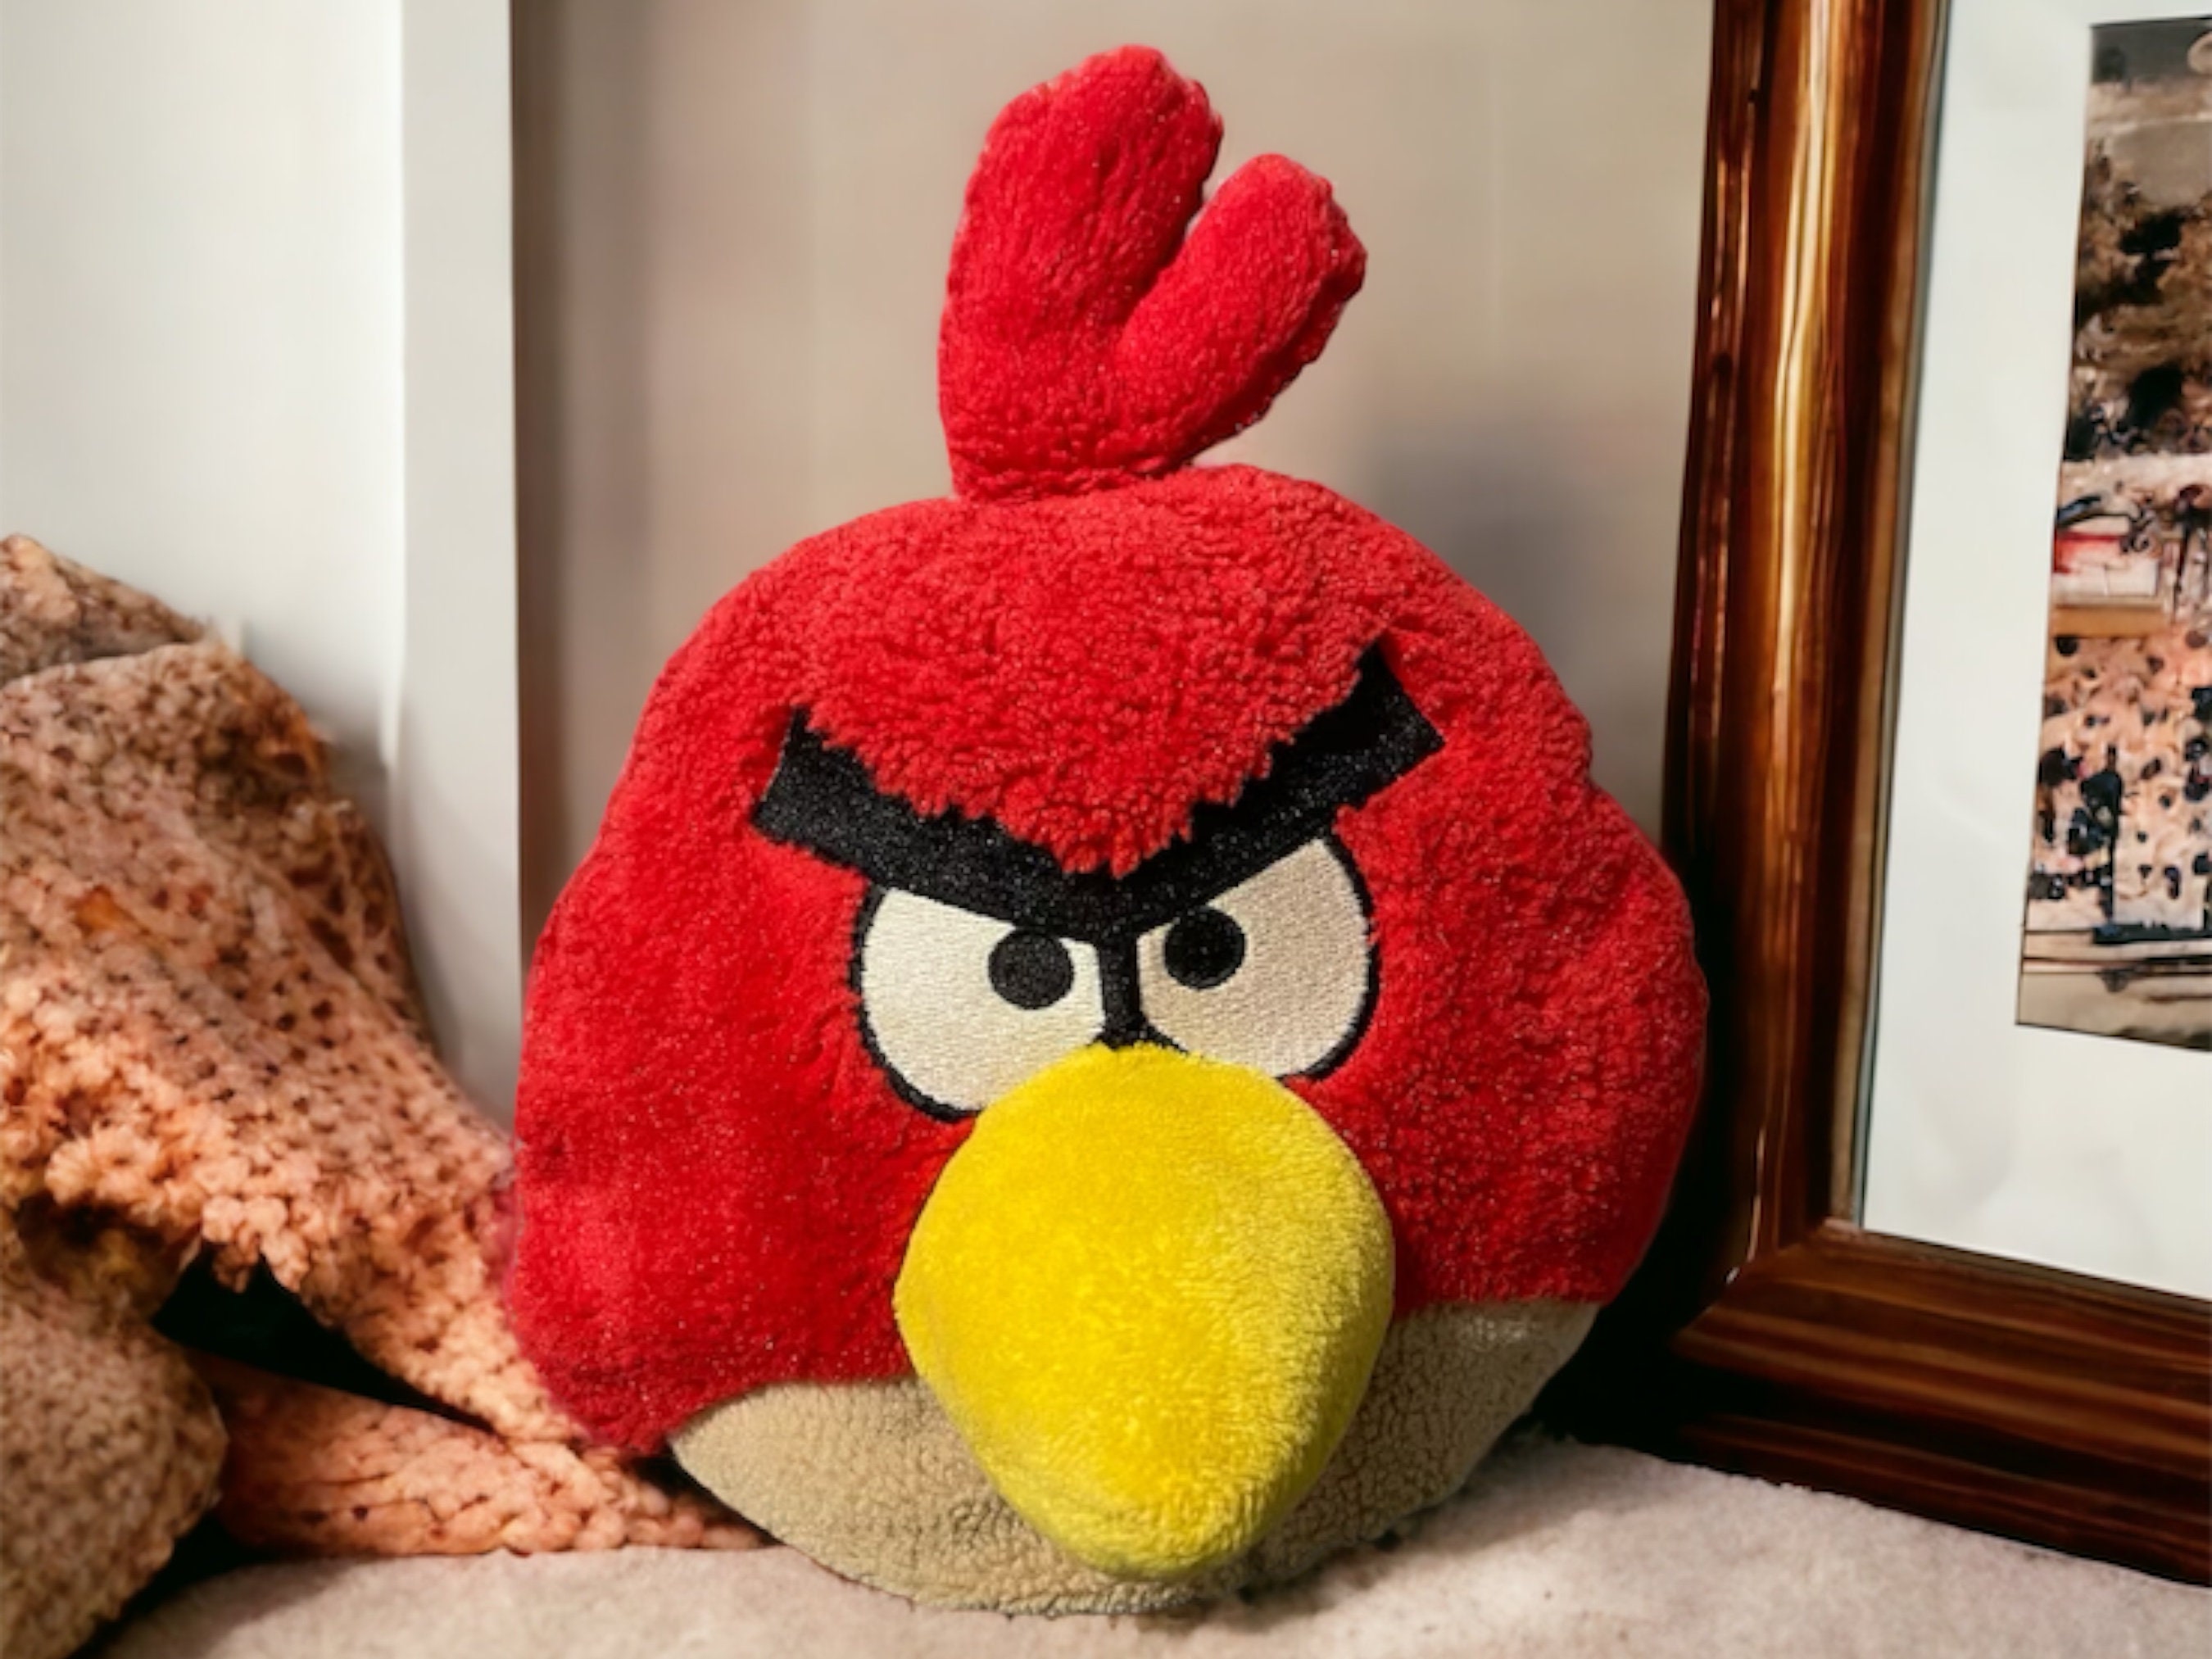 Use promo code REDHAT - Angry Birds 2 Gamers Fan-Page